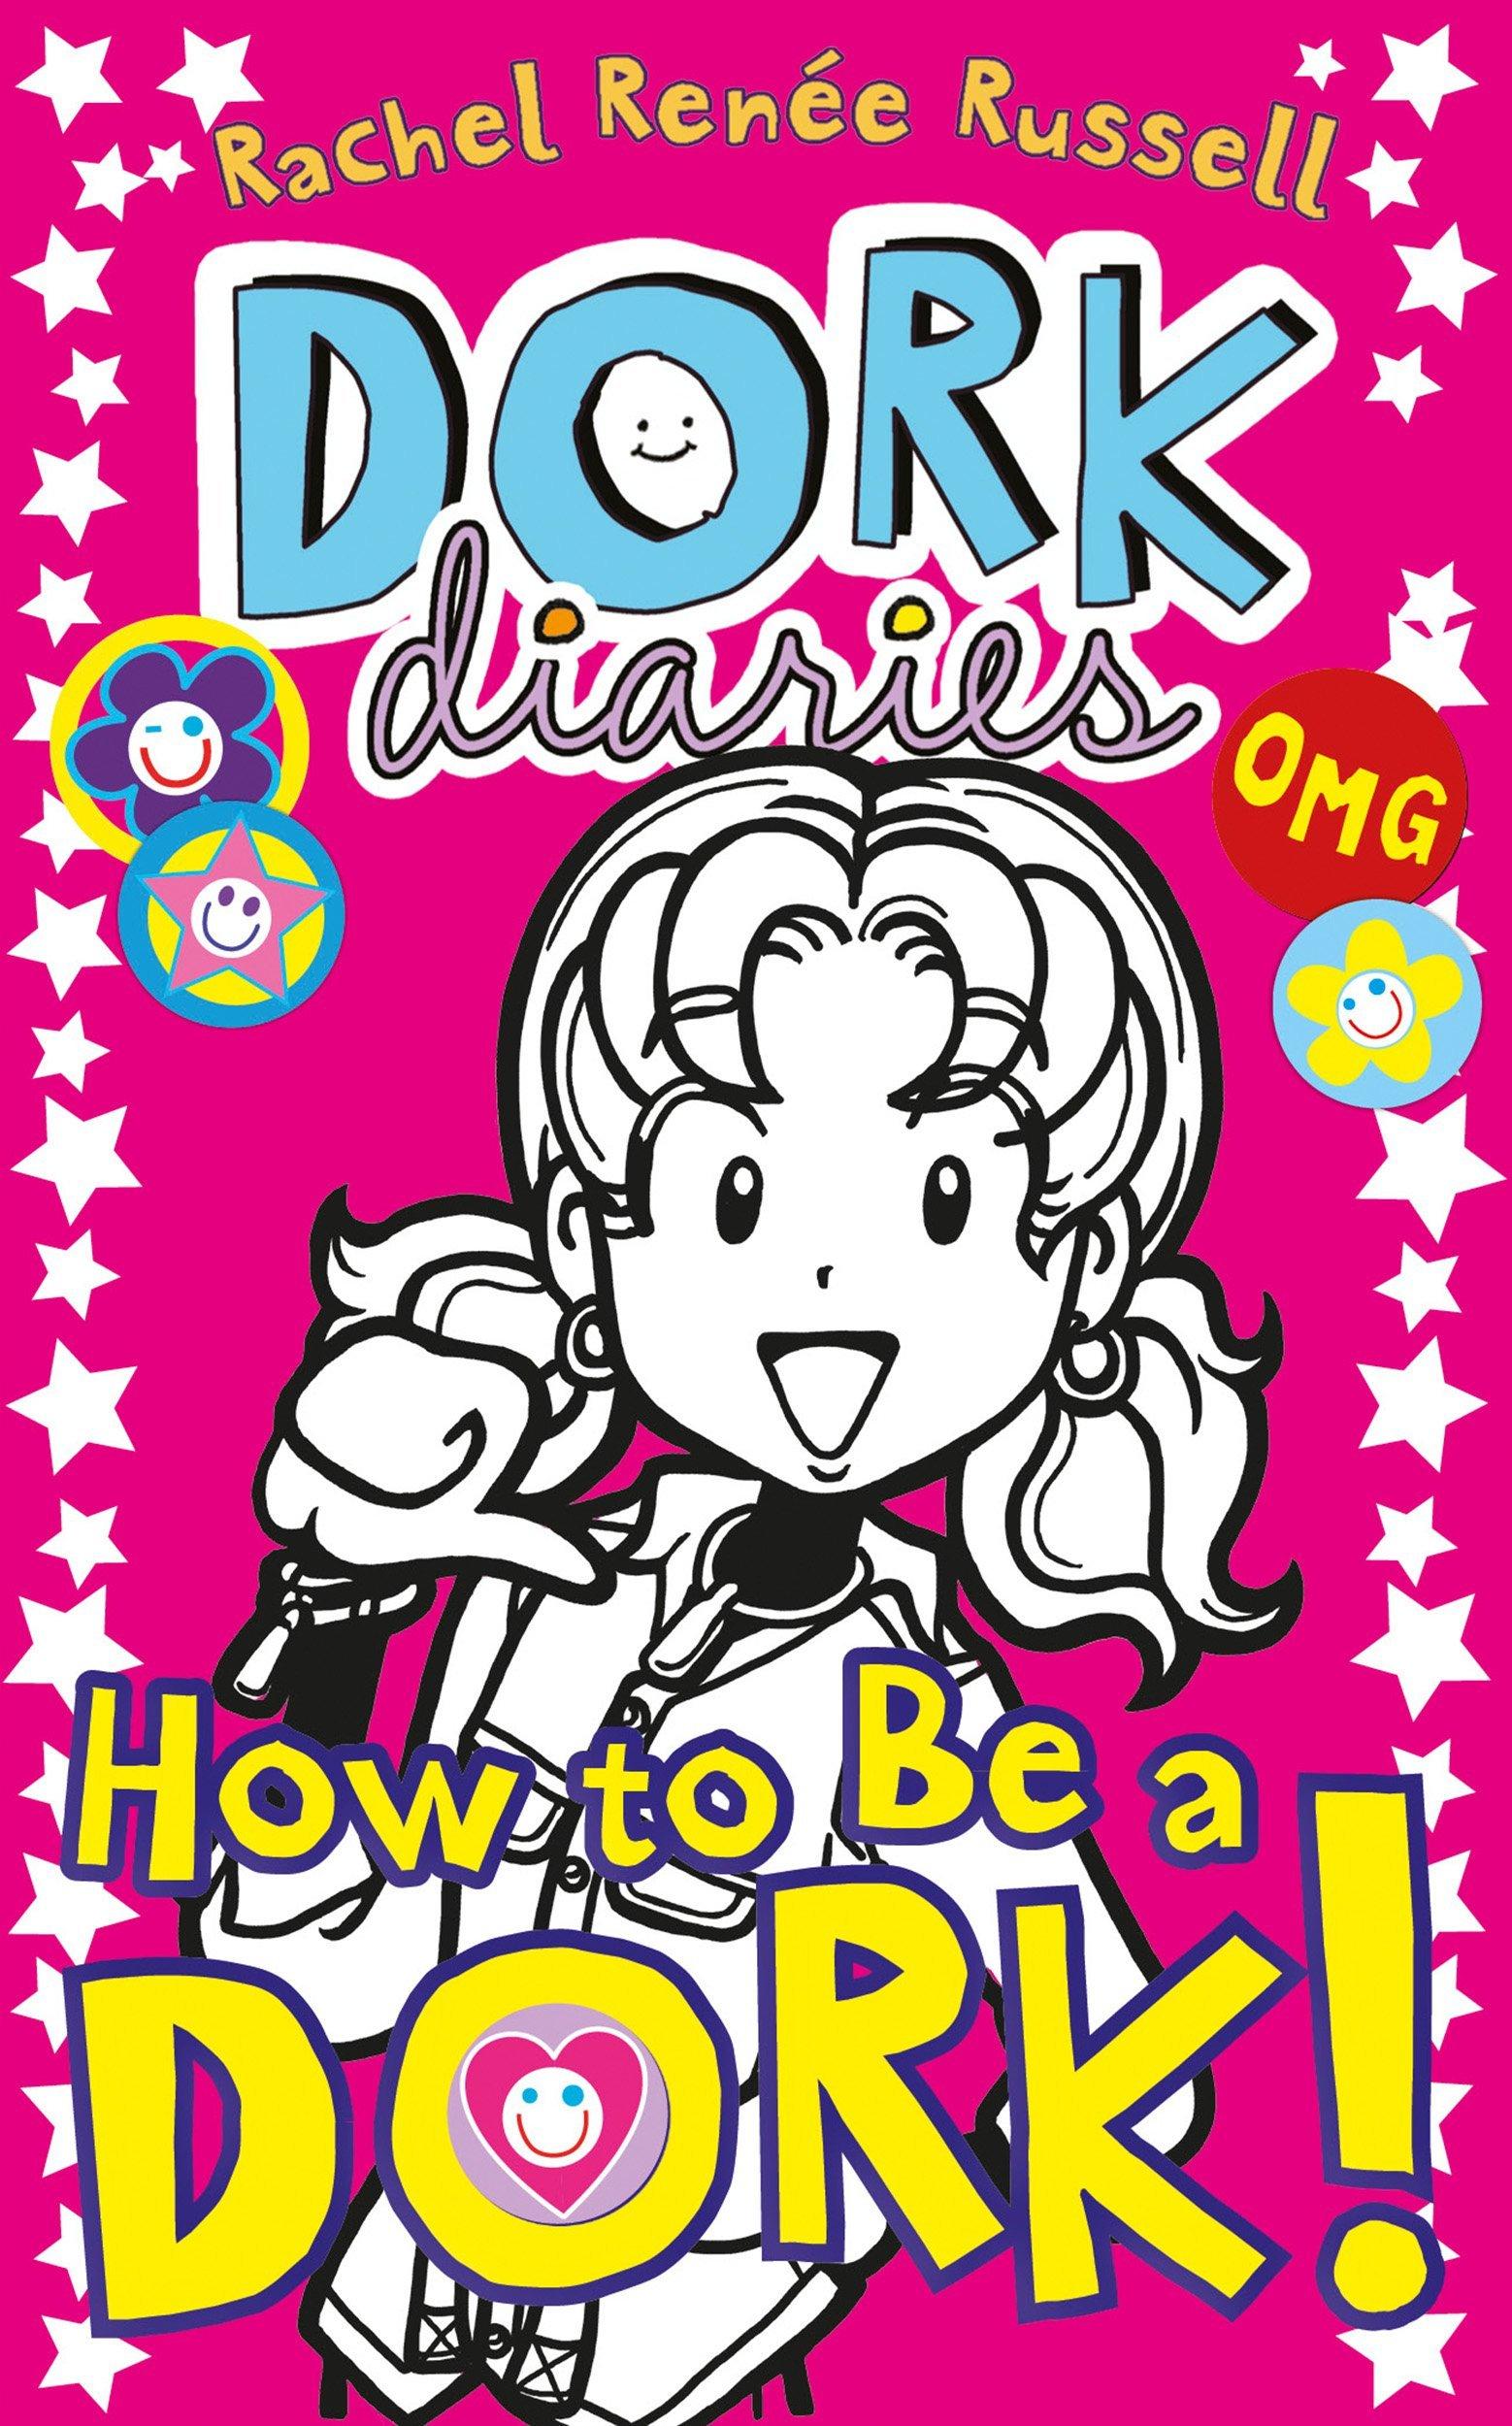 How to be a Dork!